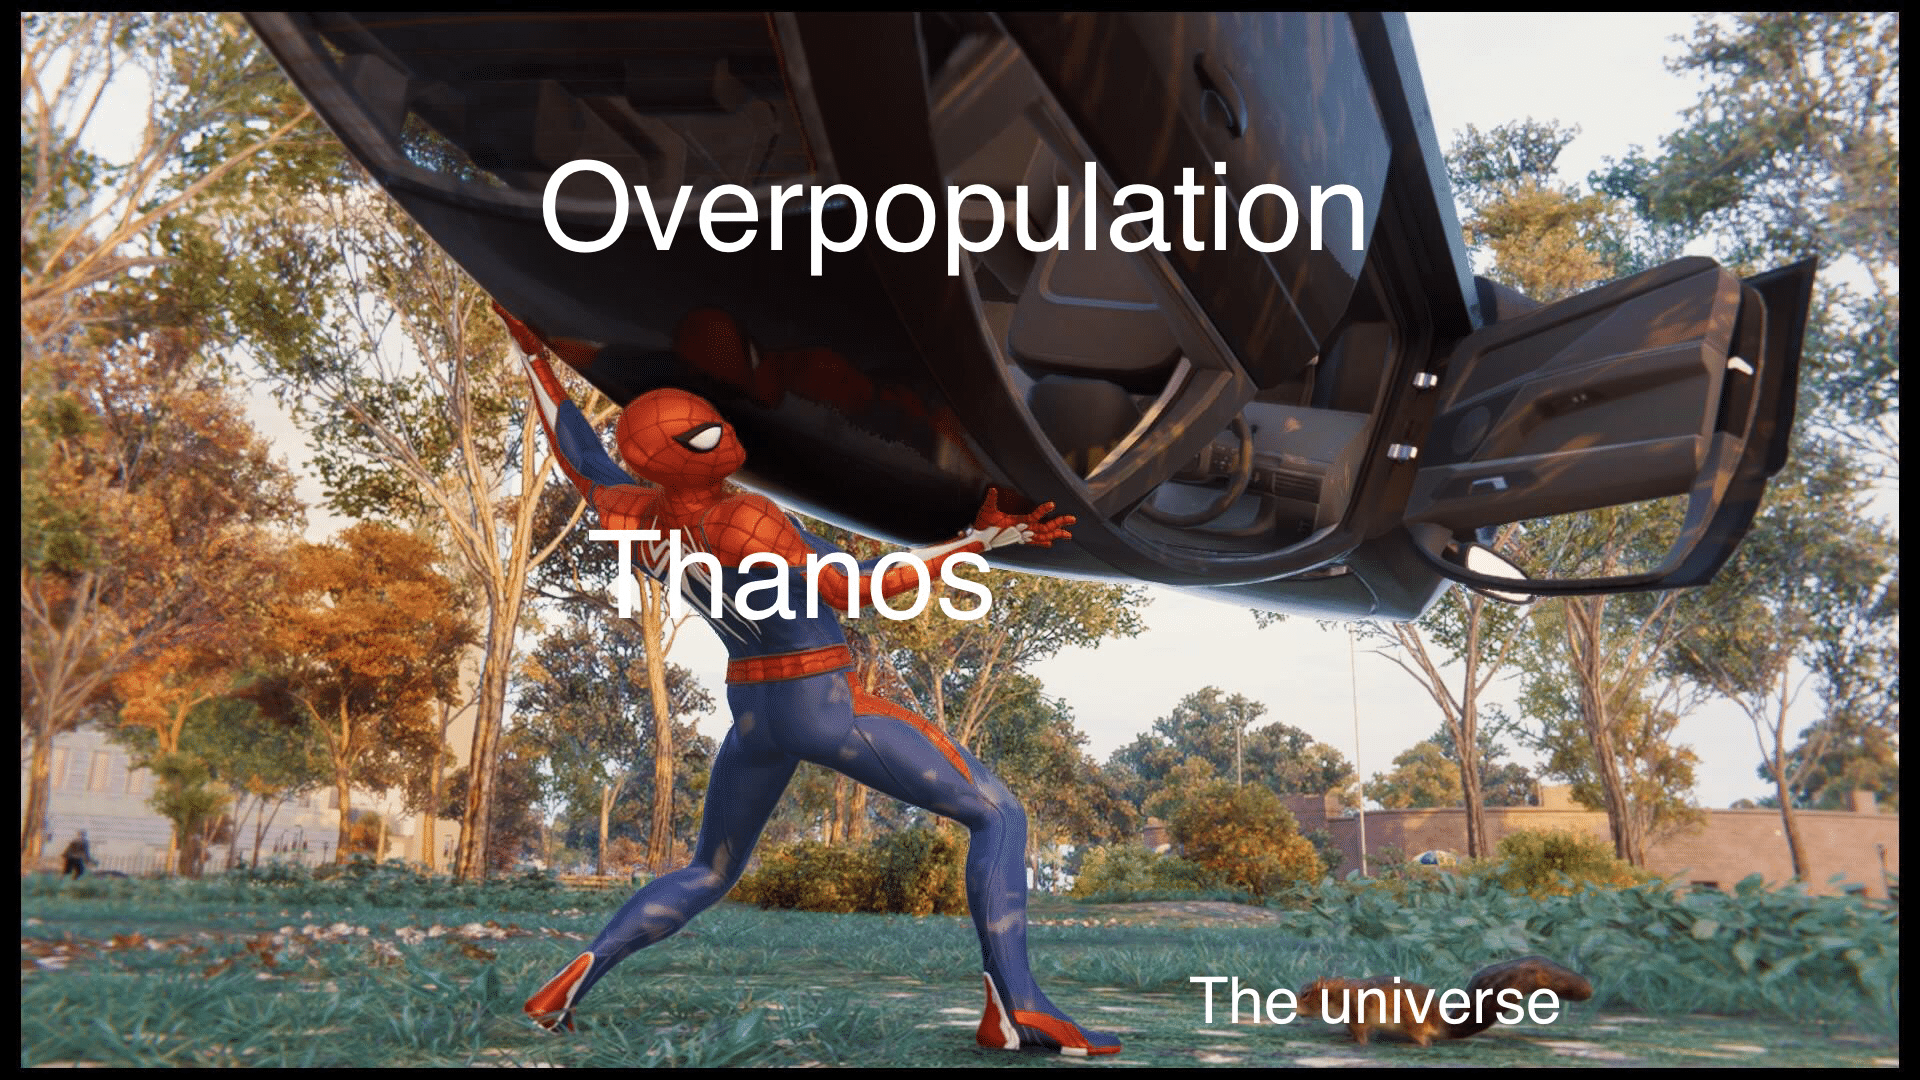 thanos avengers-memes thanos text: Overpopulation The universe 